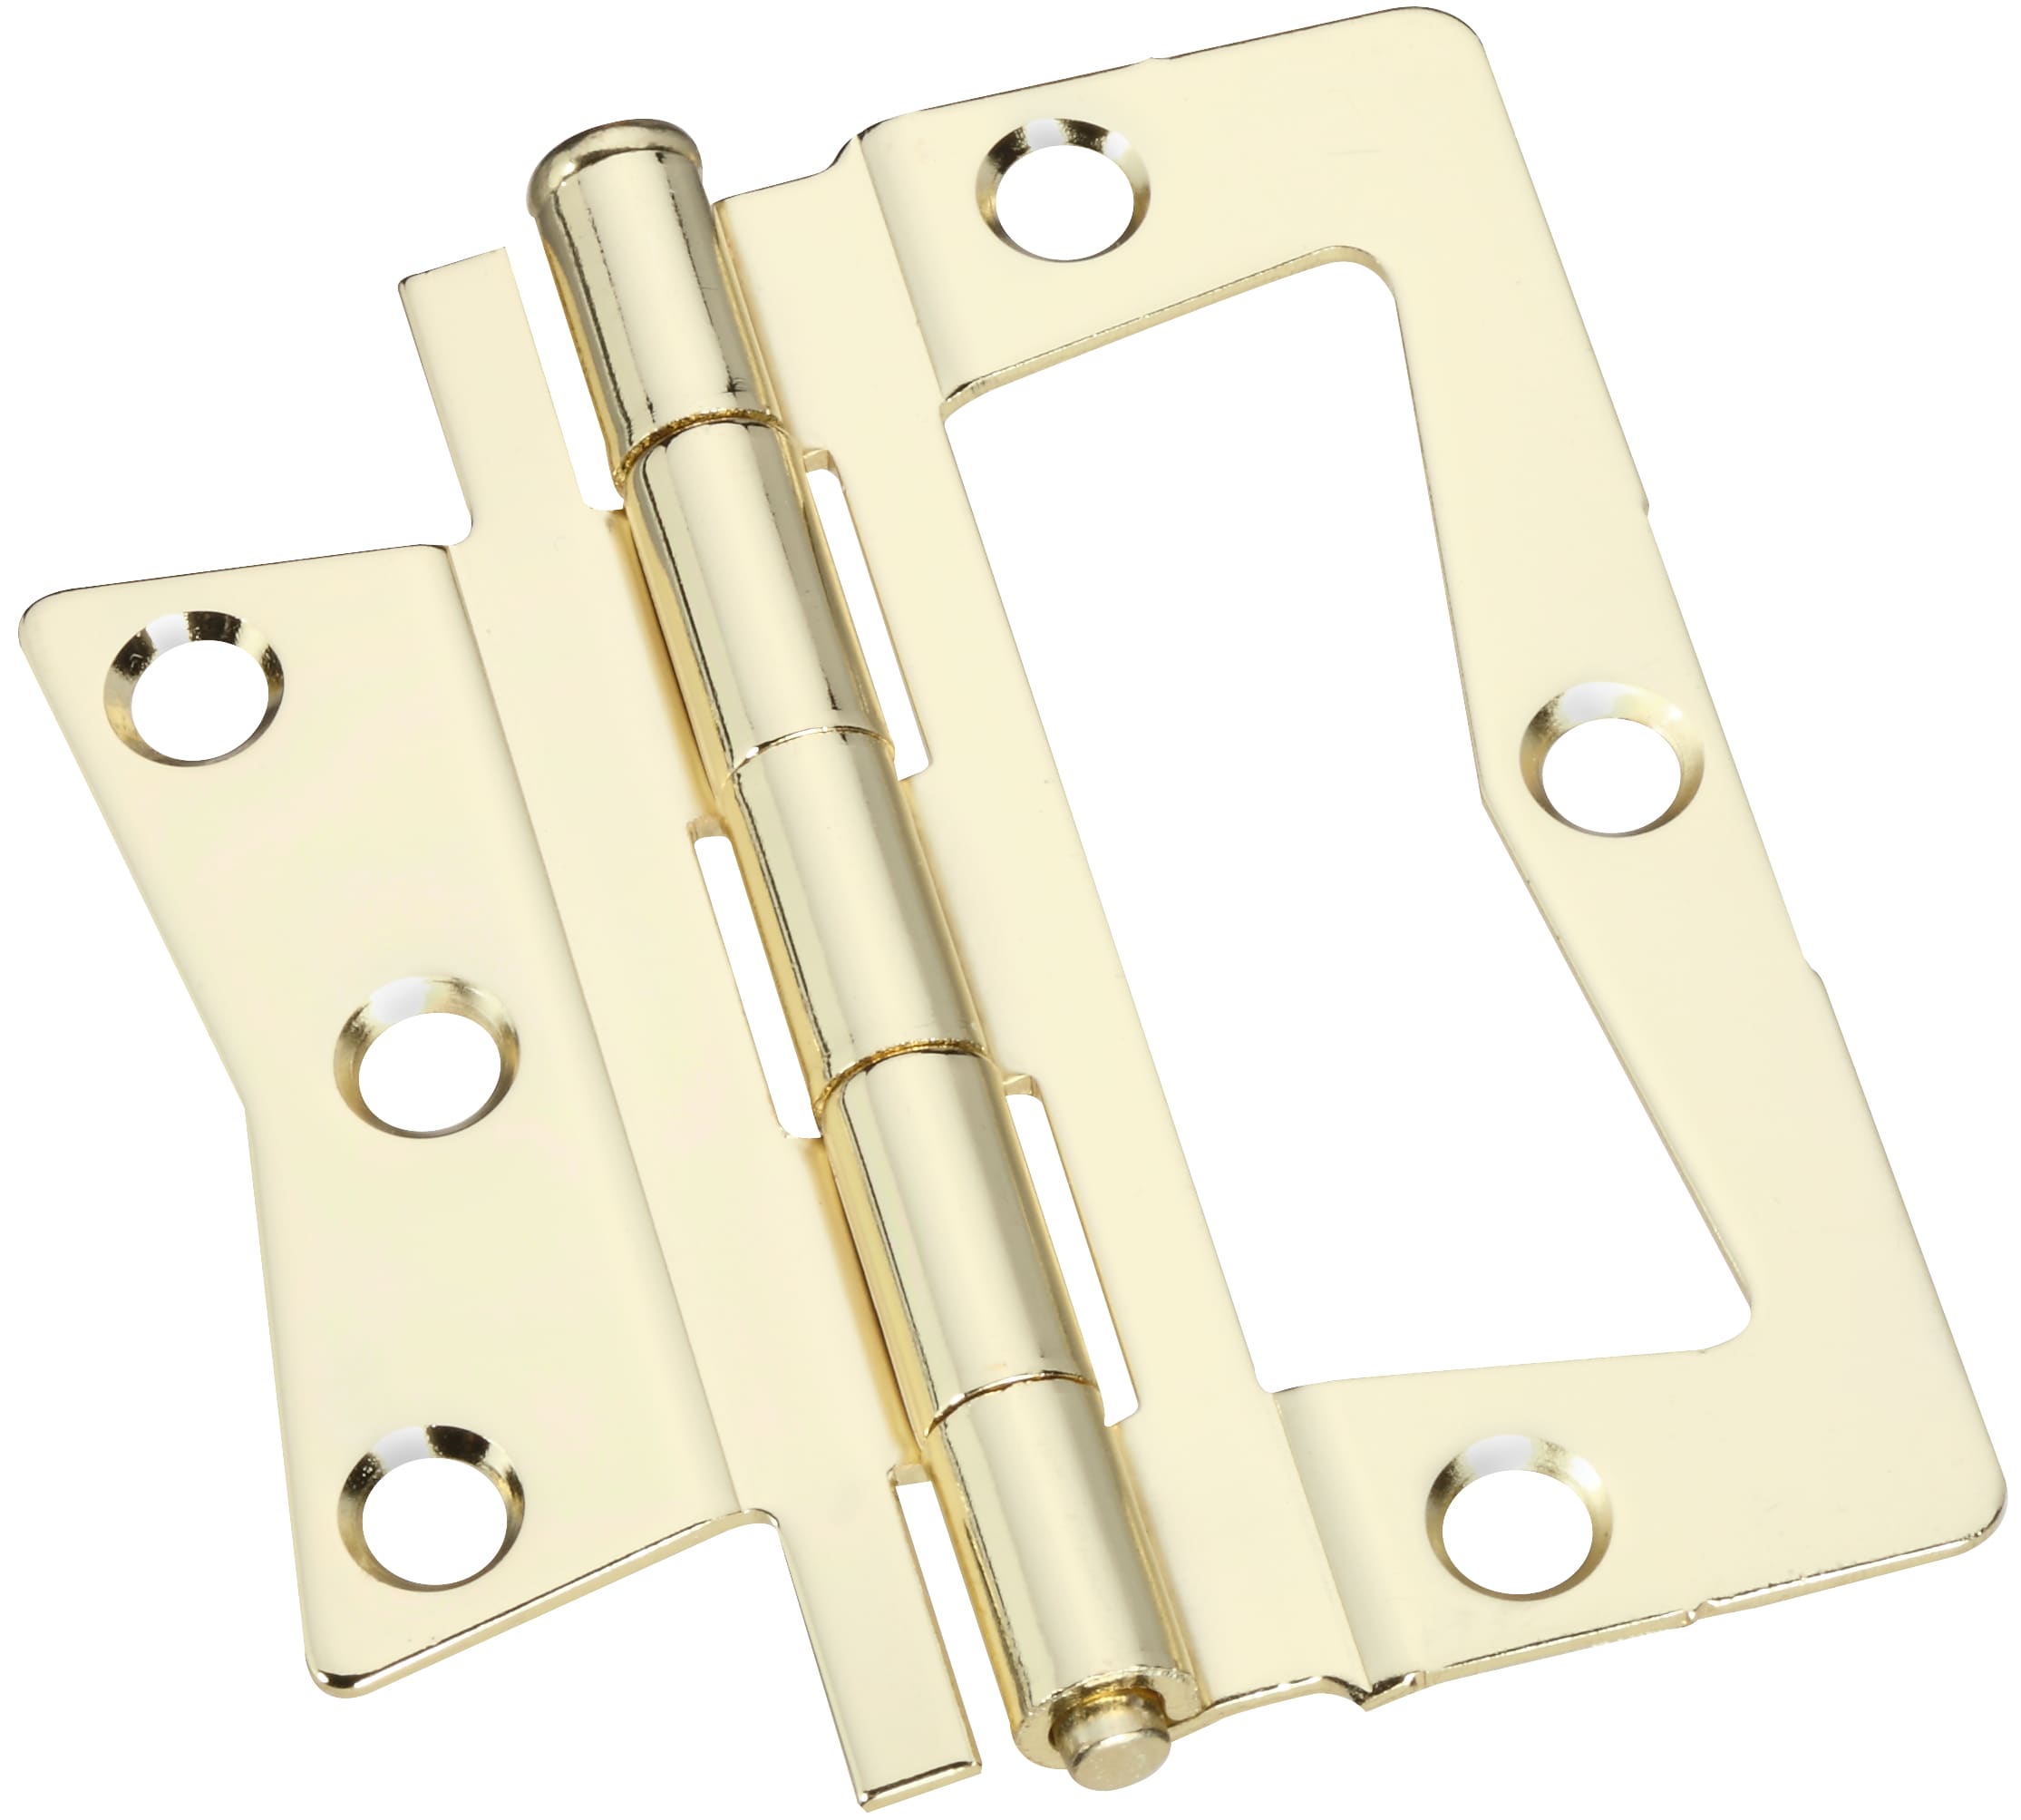 Mortise Door Hinges vs. Non-Mortise Hinges - National Lock Supply